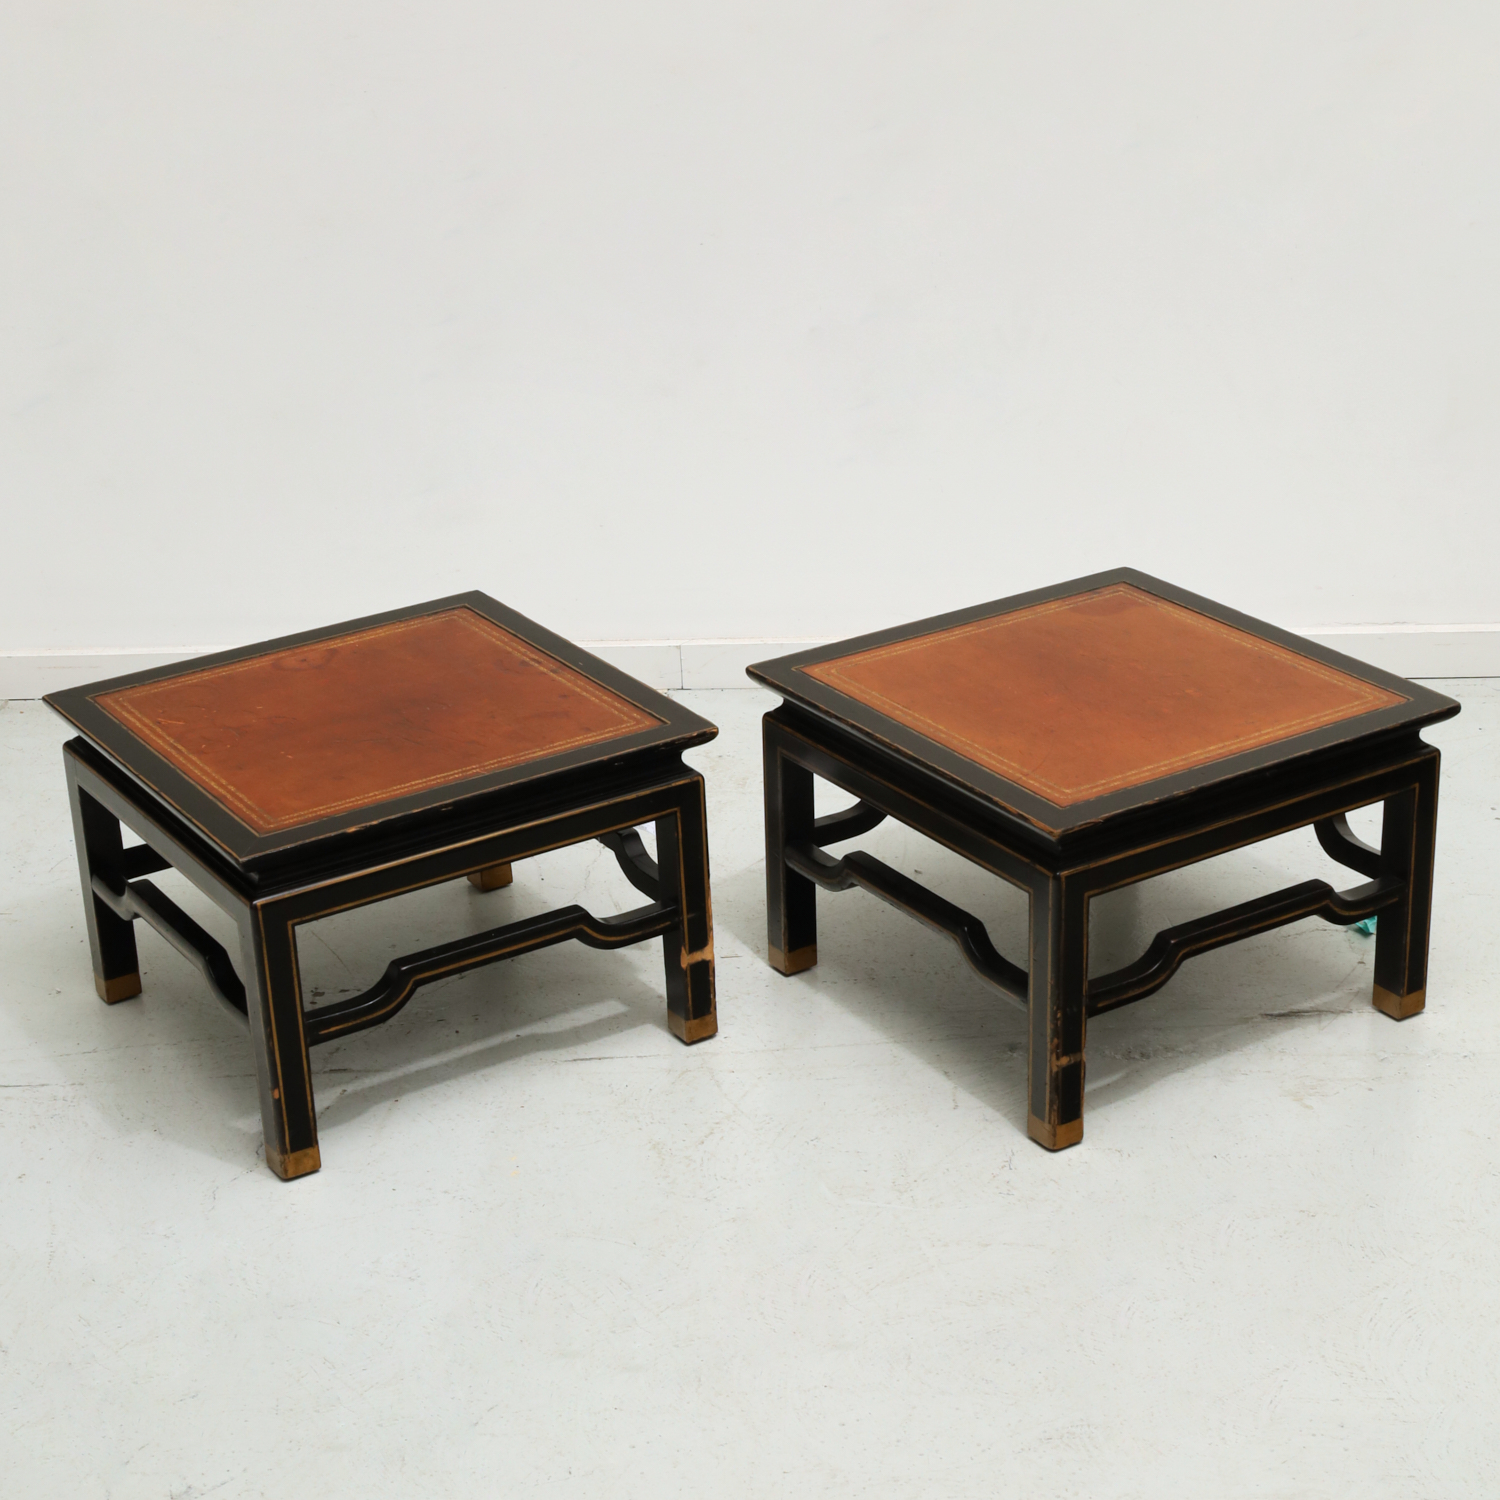 BAKER PAIR CHINOISERIE SIDE TABLES 361970